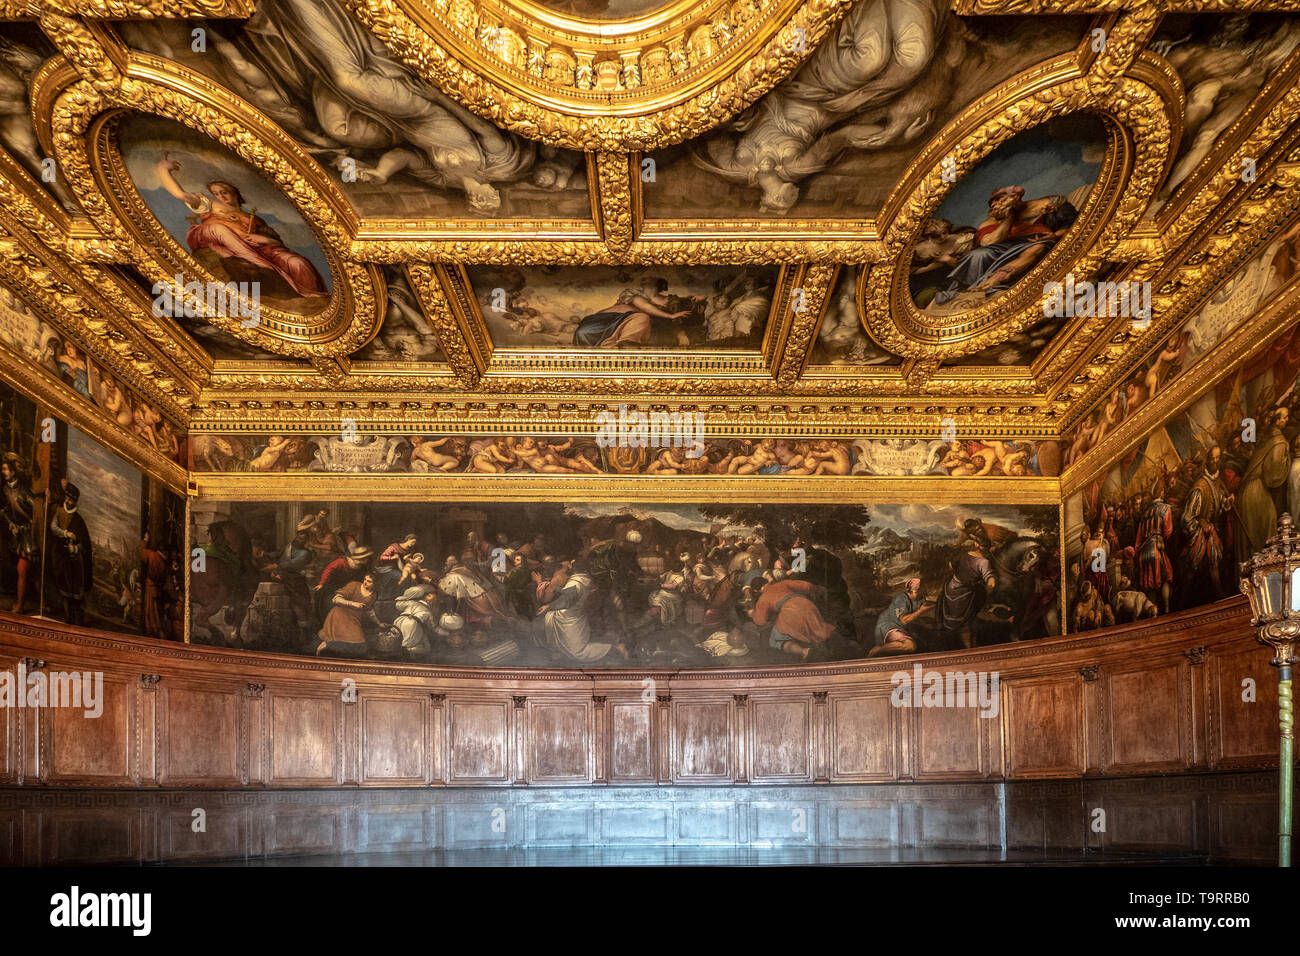 Venice, Italy - April 18 2019 The Chamber of the Council of tens at the Doge Palace. Painting detail. Stock Photo